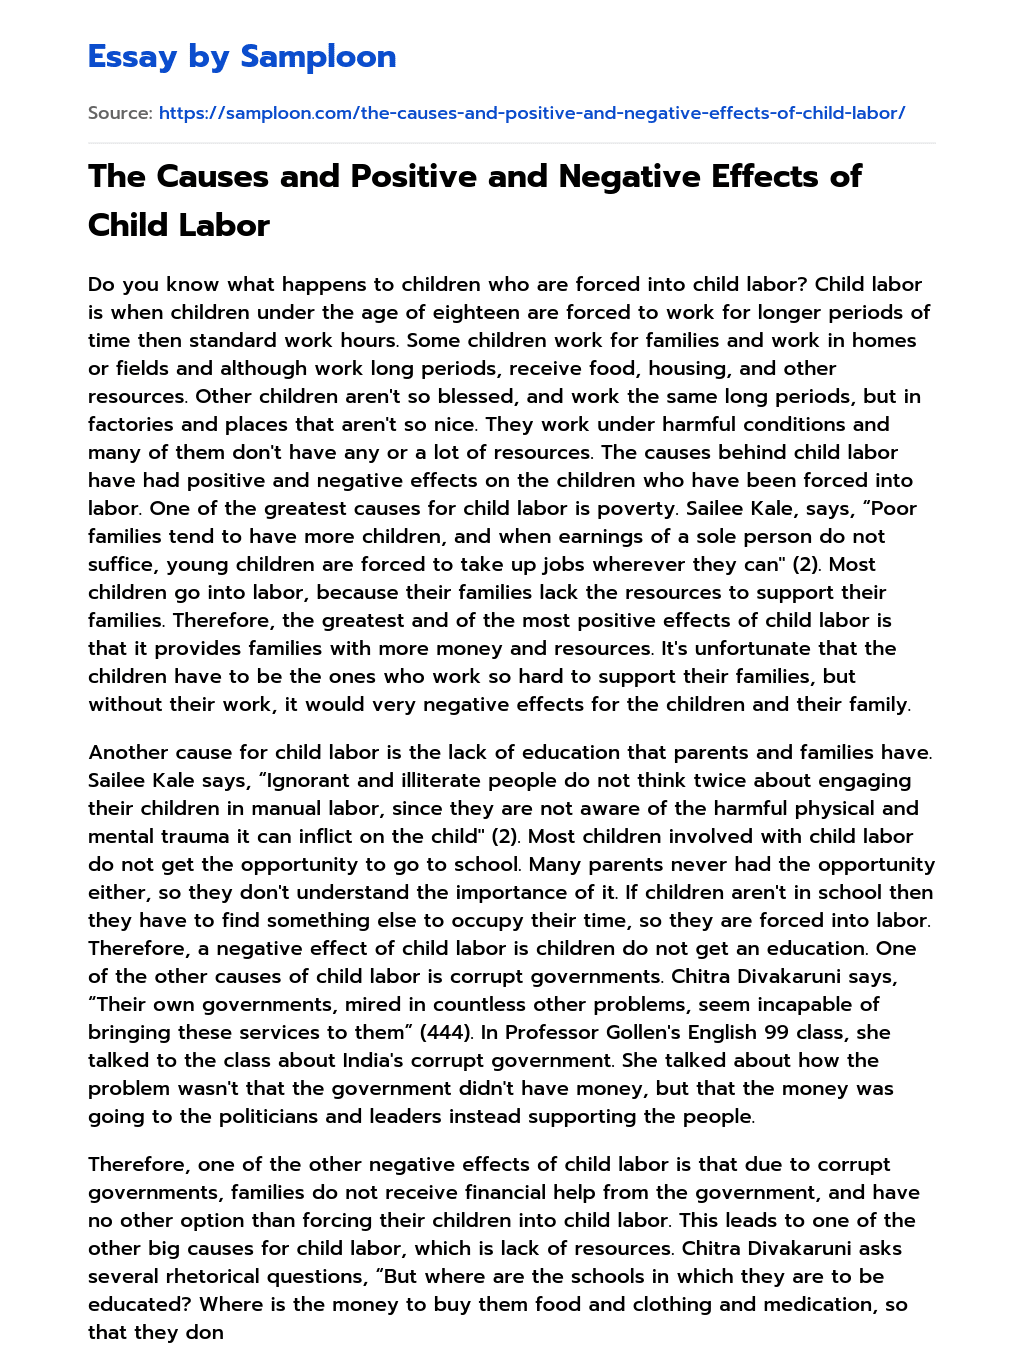 The Causes and Positive and Negative Effects of Child Labor essay